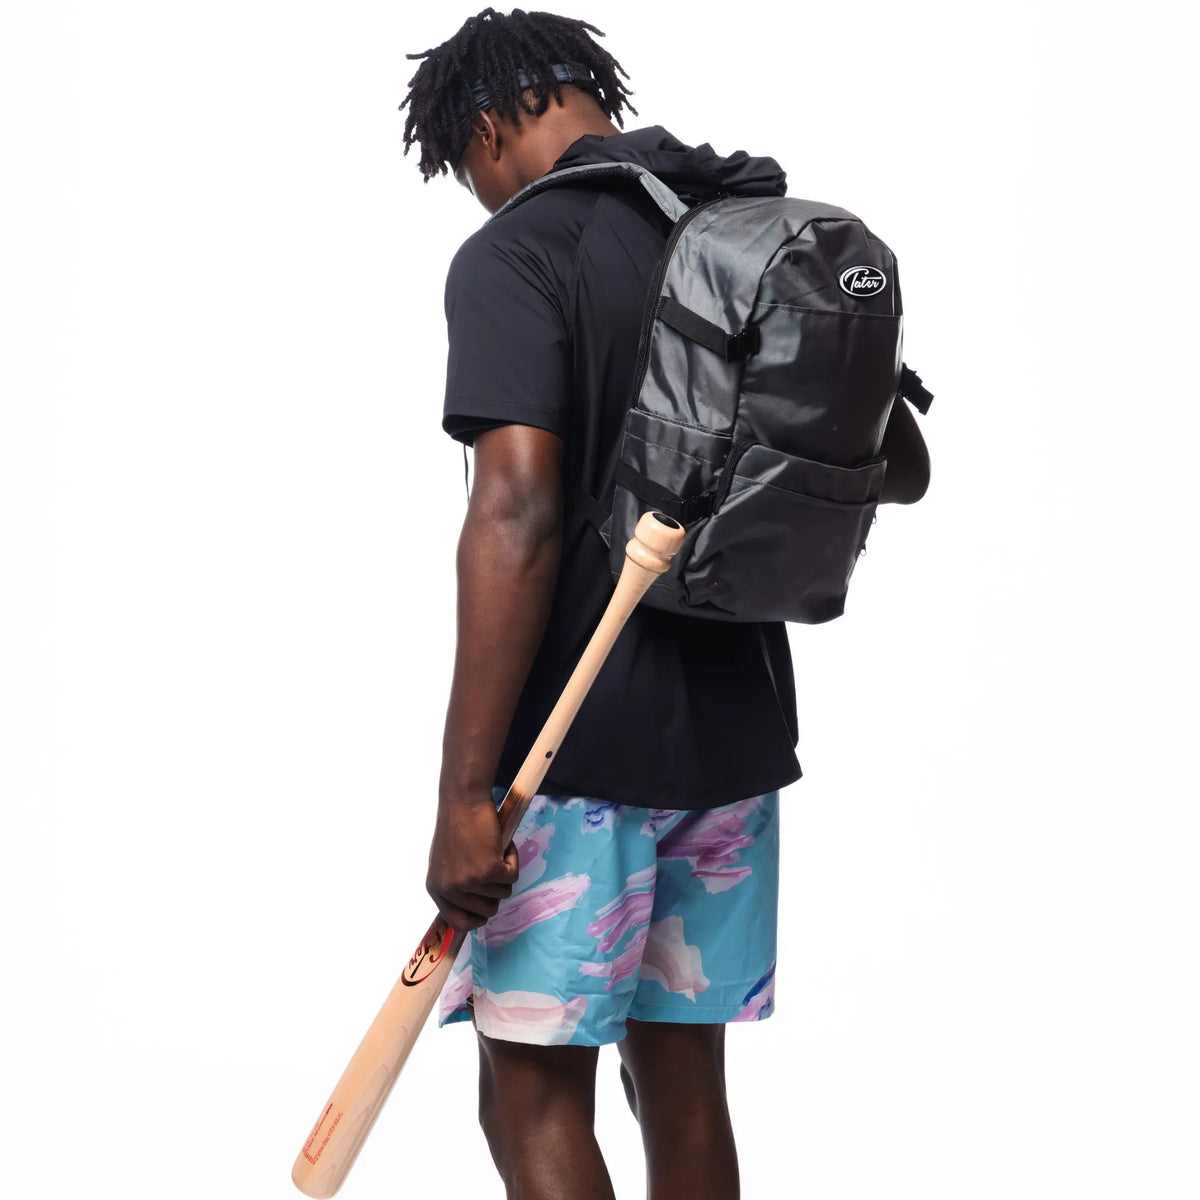 In the photo, an athlete is ready for action with a Tater Baseball backpack and a bat, wearing a black hoodie and eye-catching blue and pink workout shorts. This gear represents Tater Baseball&#39;s blend of style and functionality for the sport.